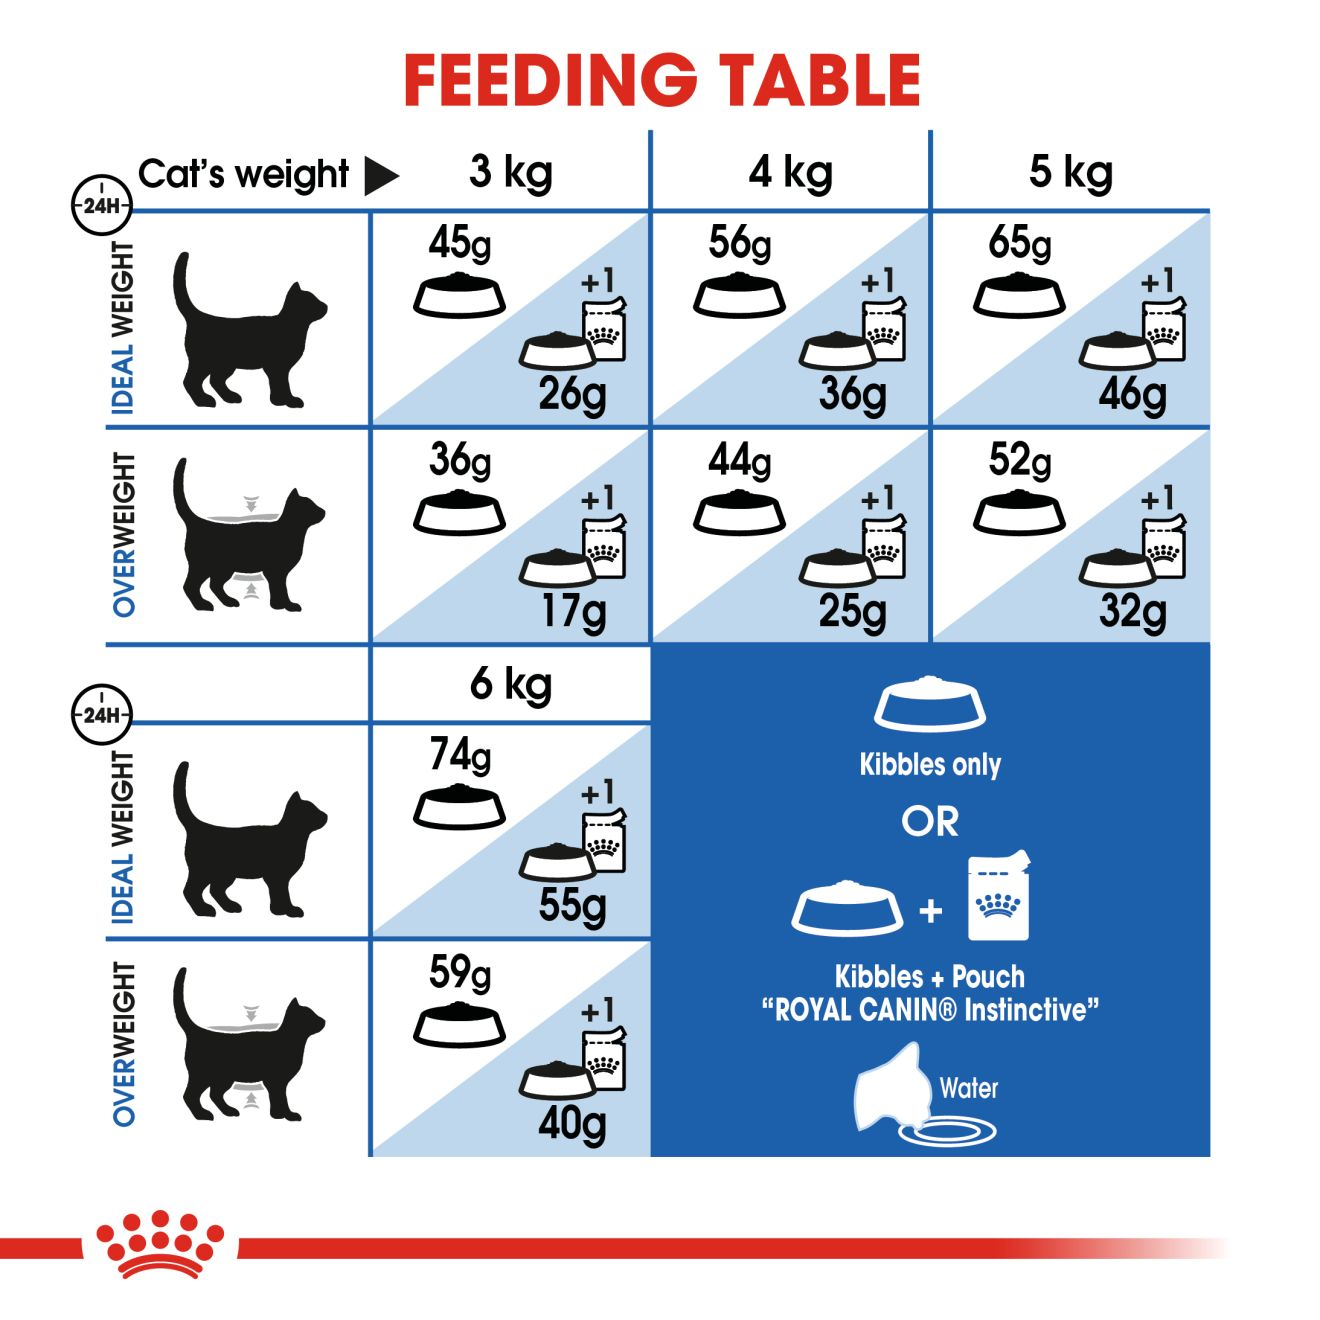 royal canin indoor dry cat food